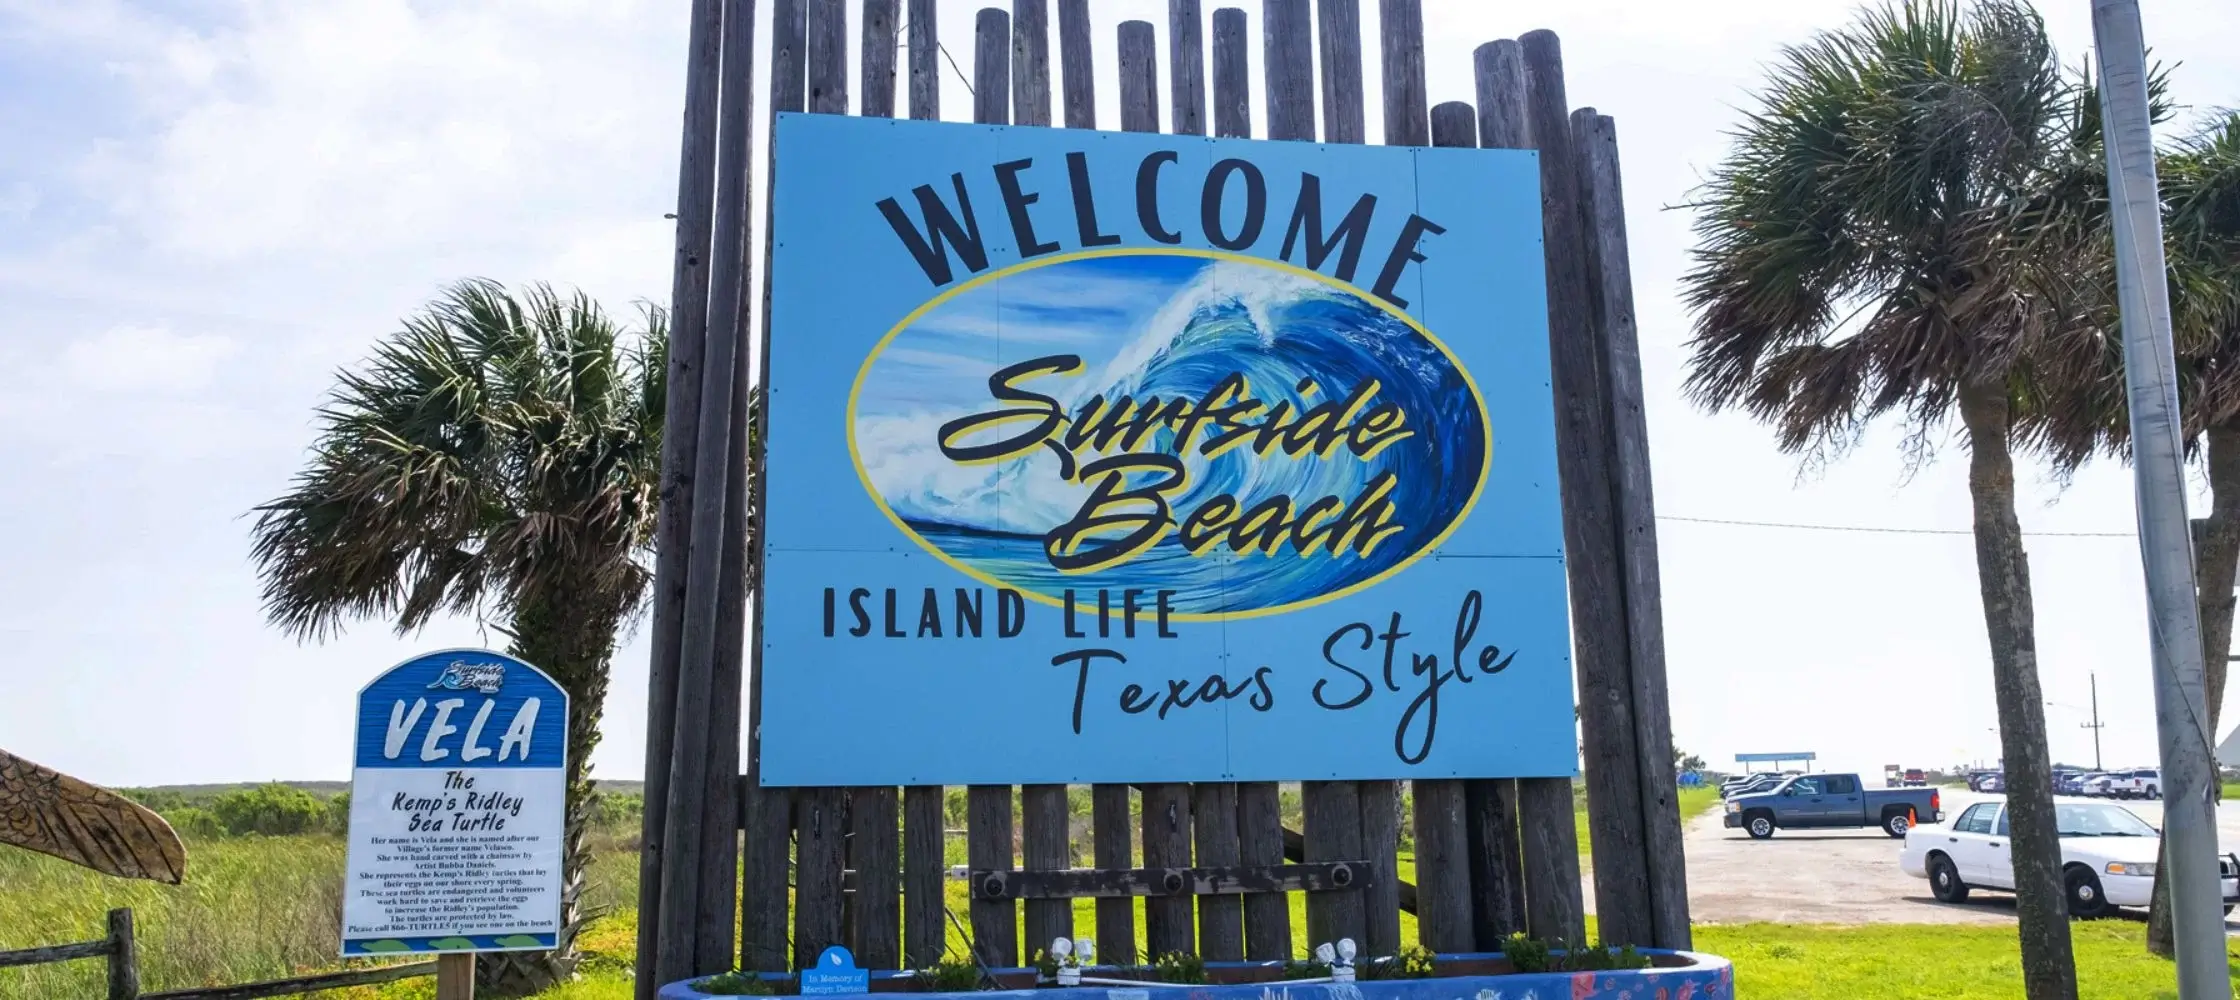 17 Things to Do in Surfside Beach TX: Your Ultimate Beach Getaway